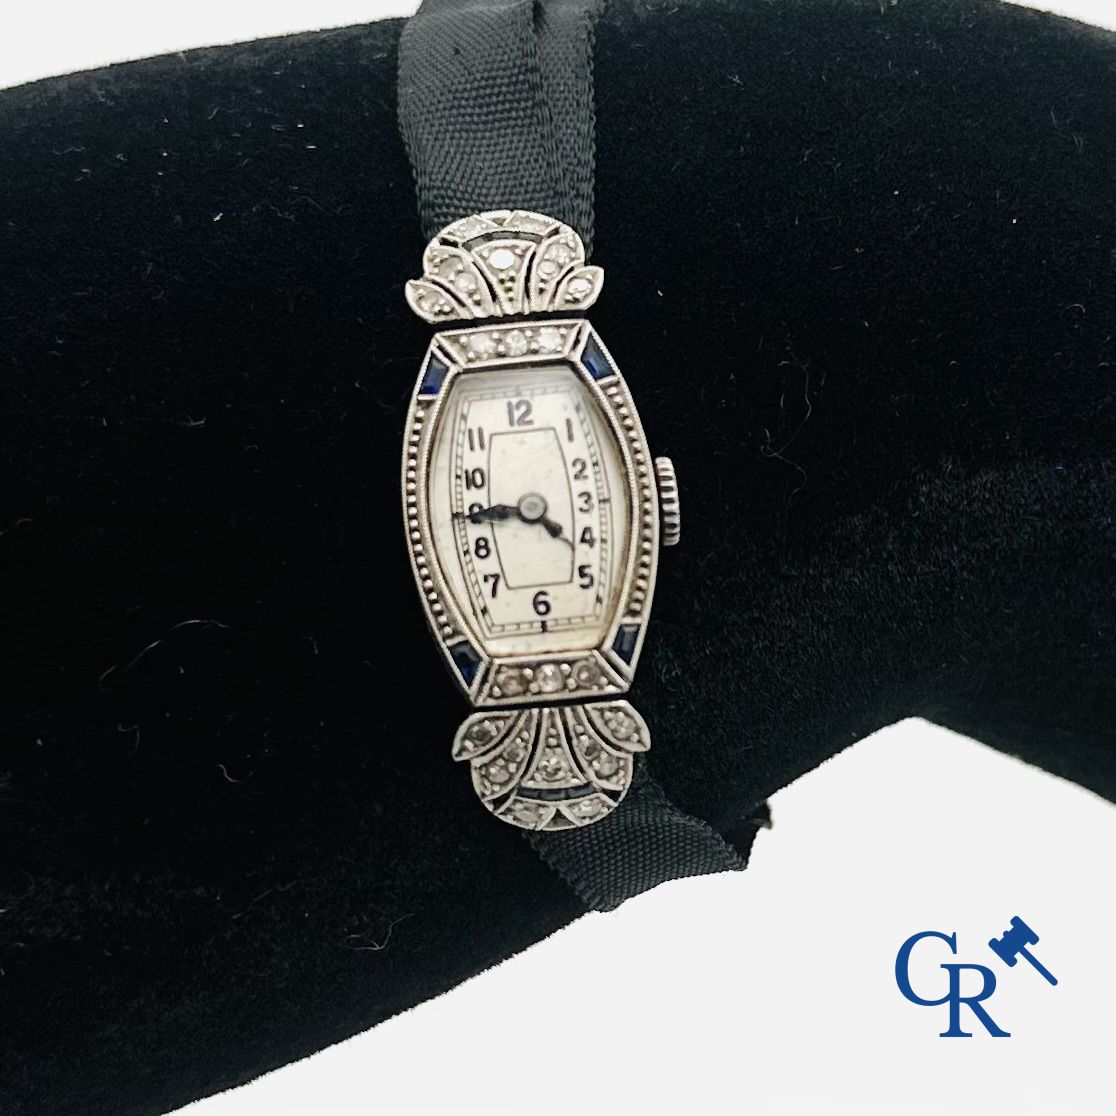 Jewellery: Art deco ladies watch in Platinum set with sapphire and diamonds. (working condition)